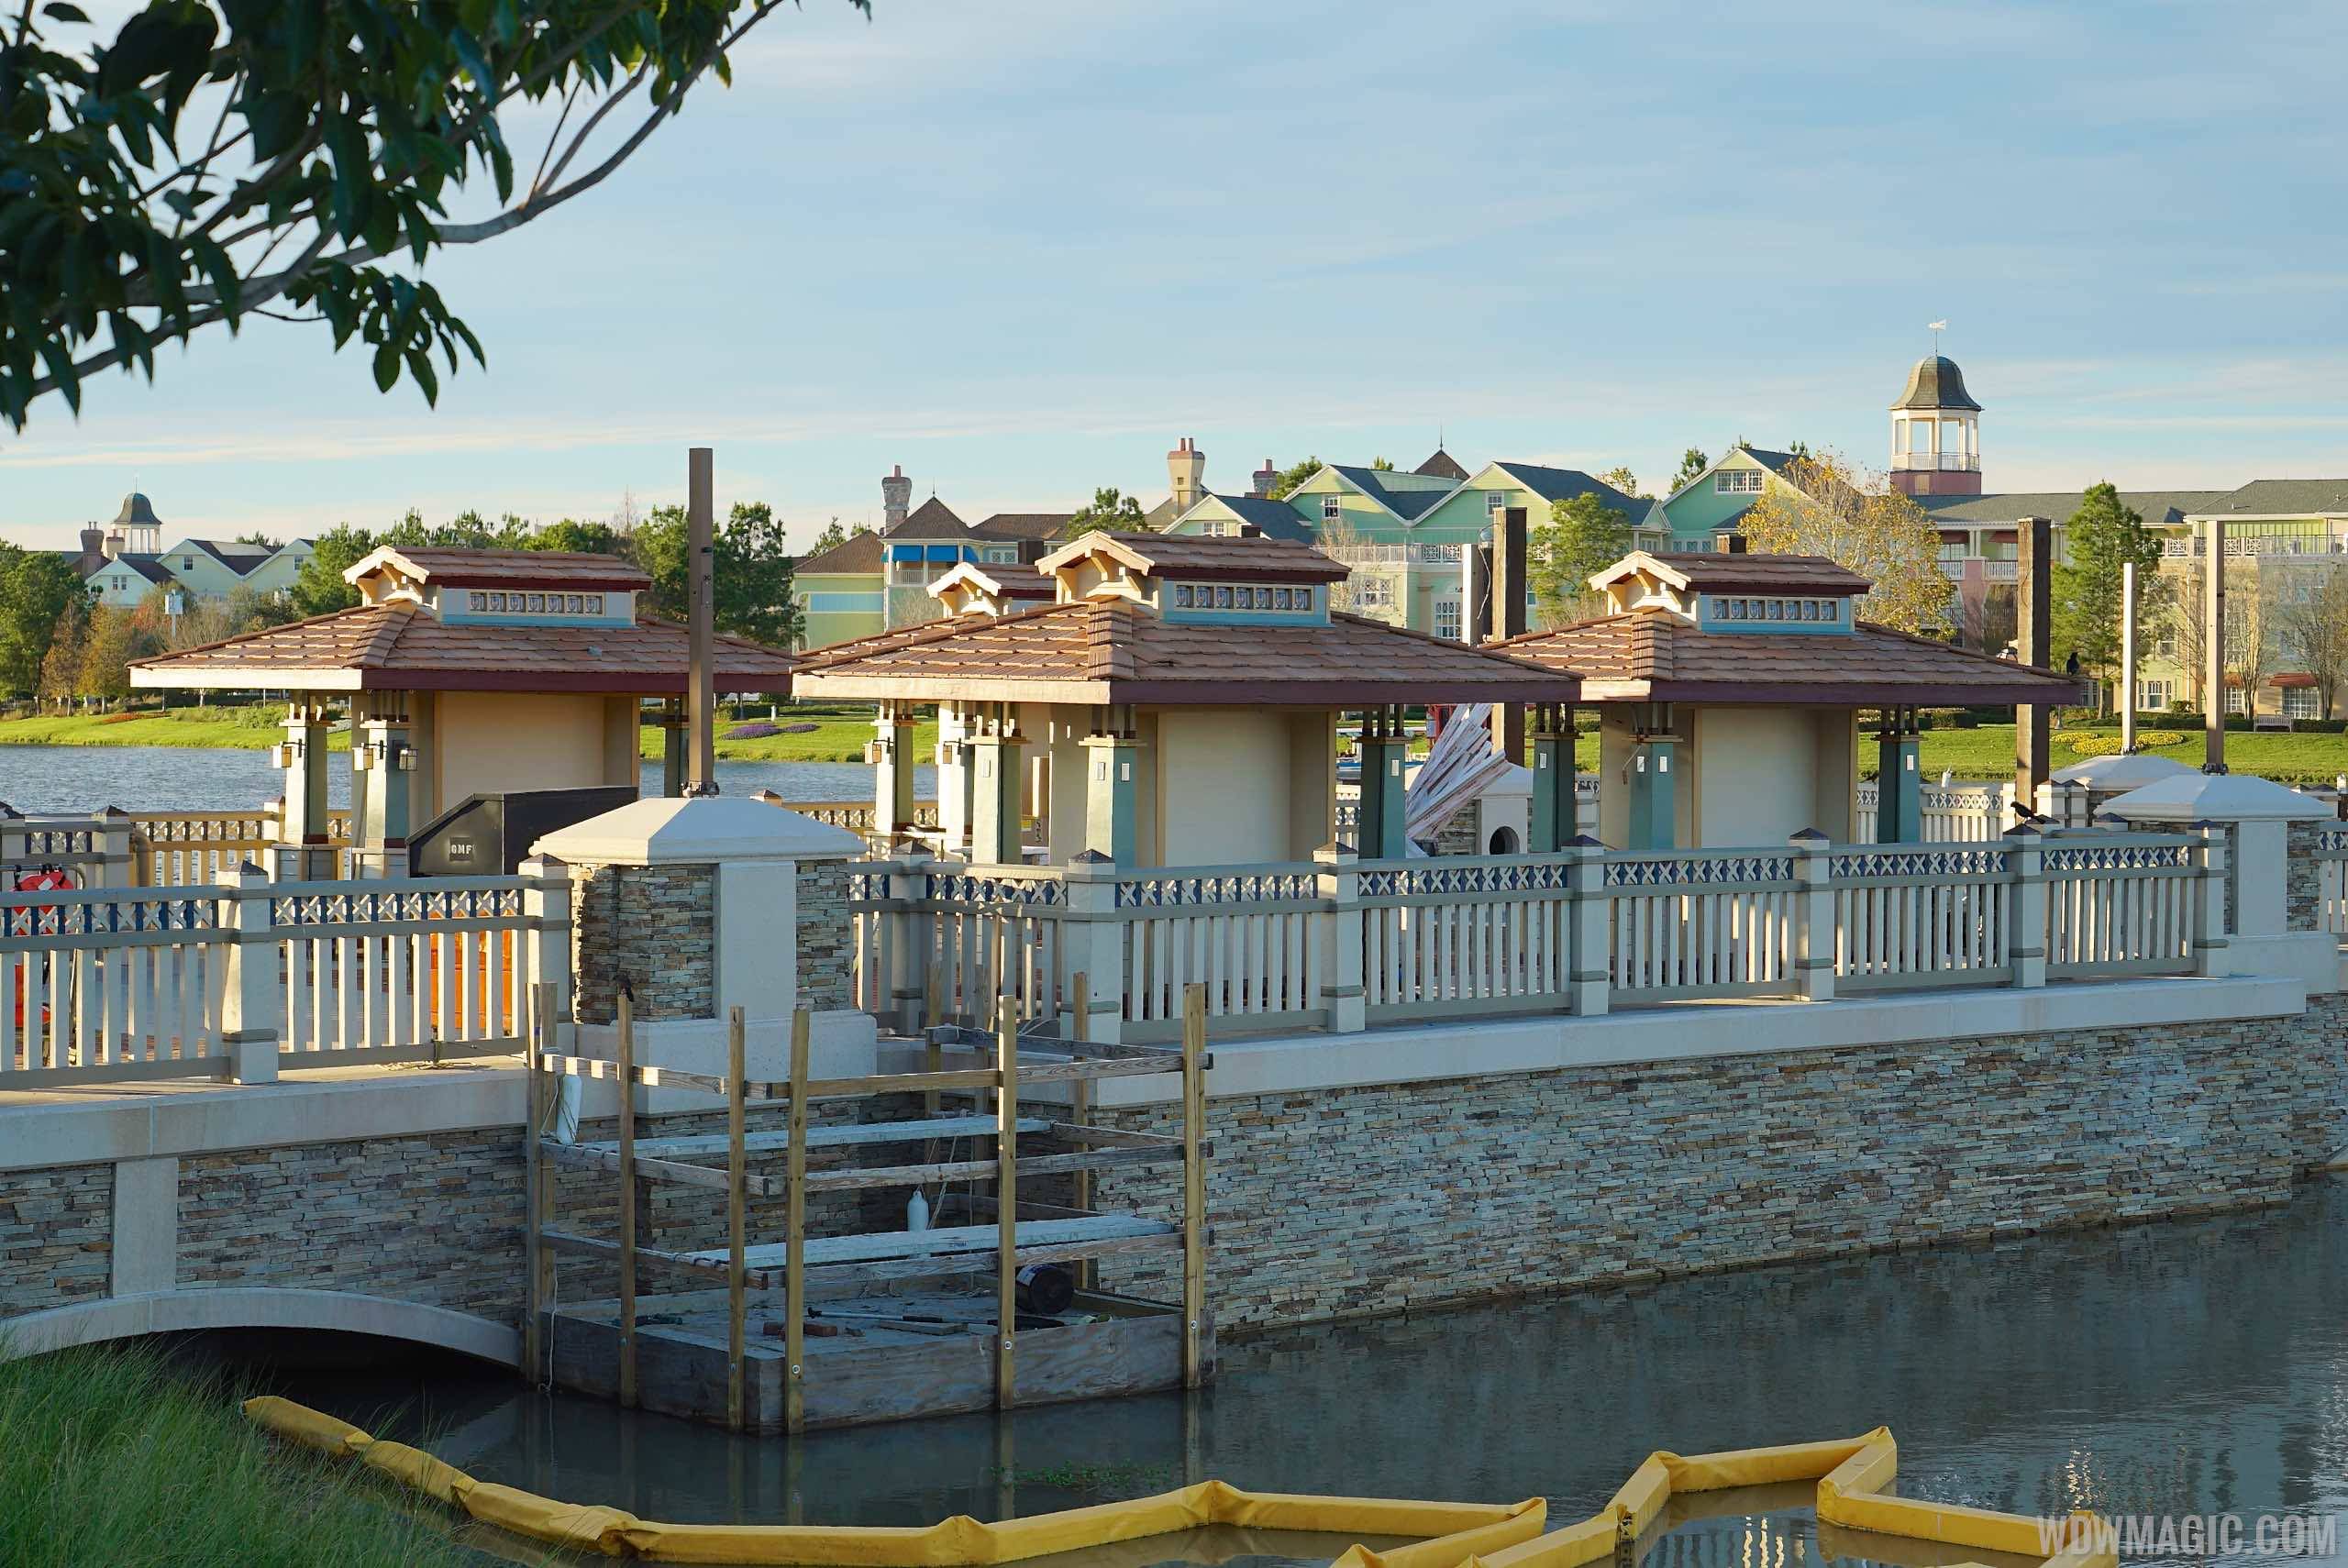 PHOTOS - Kiosks now in place on the Disney Springs Marketplace Causeway